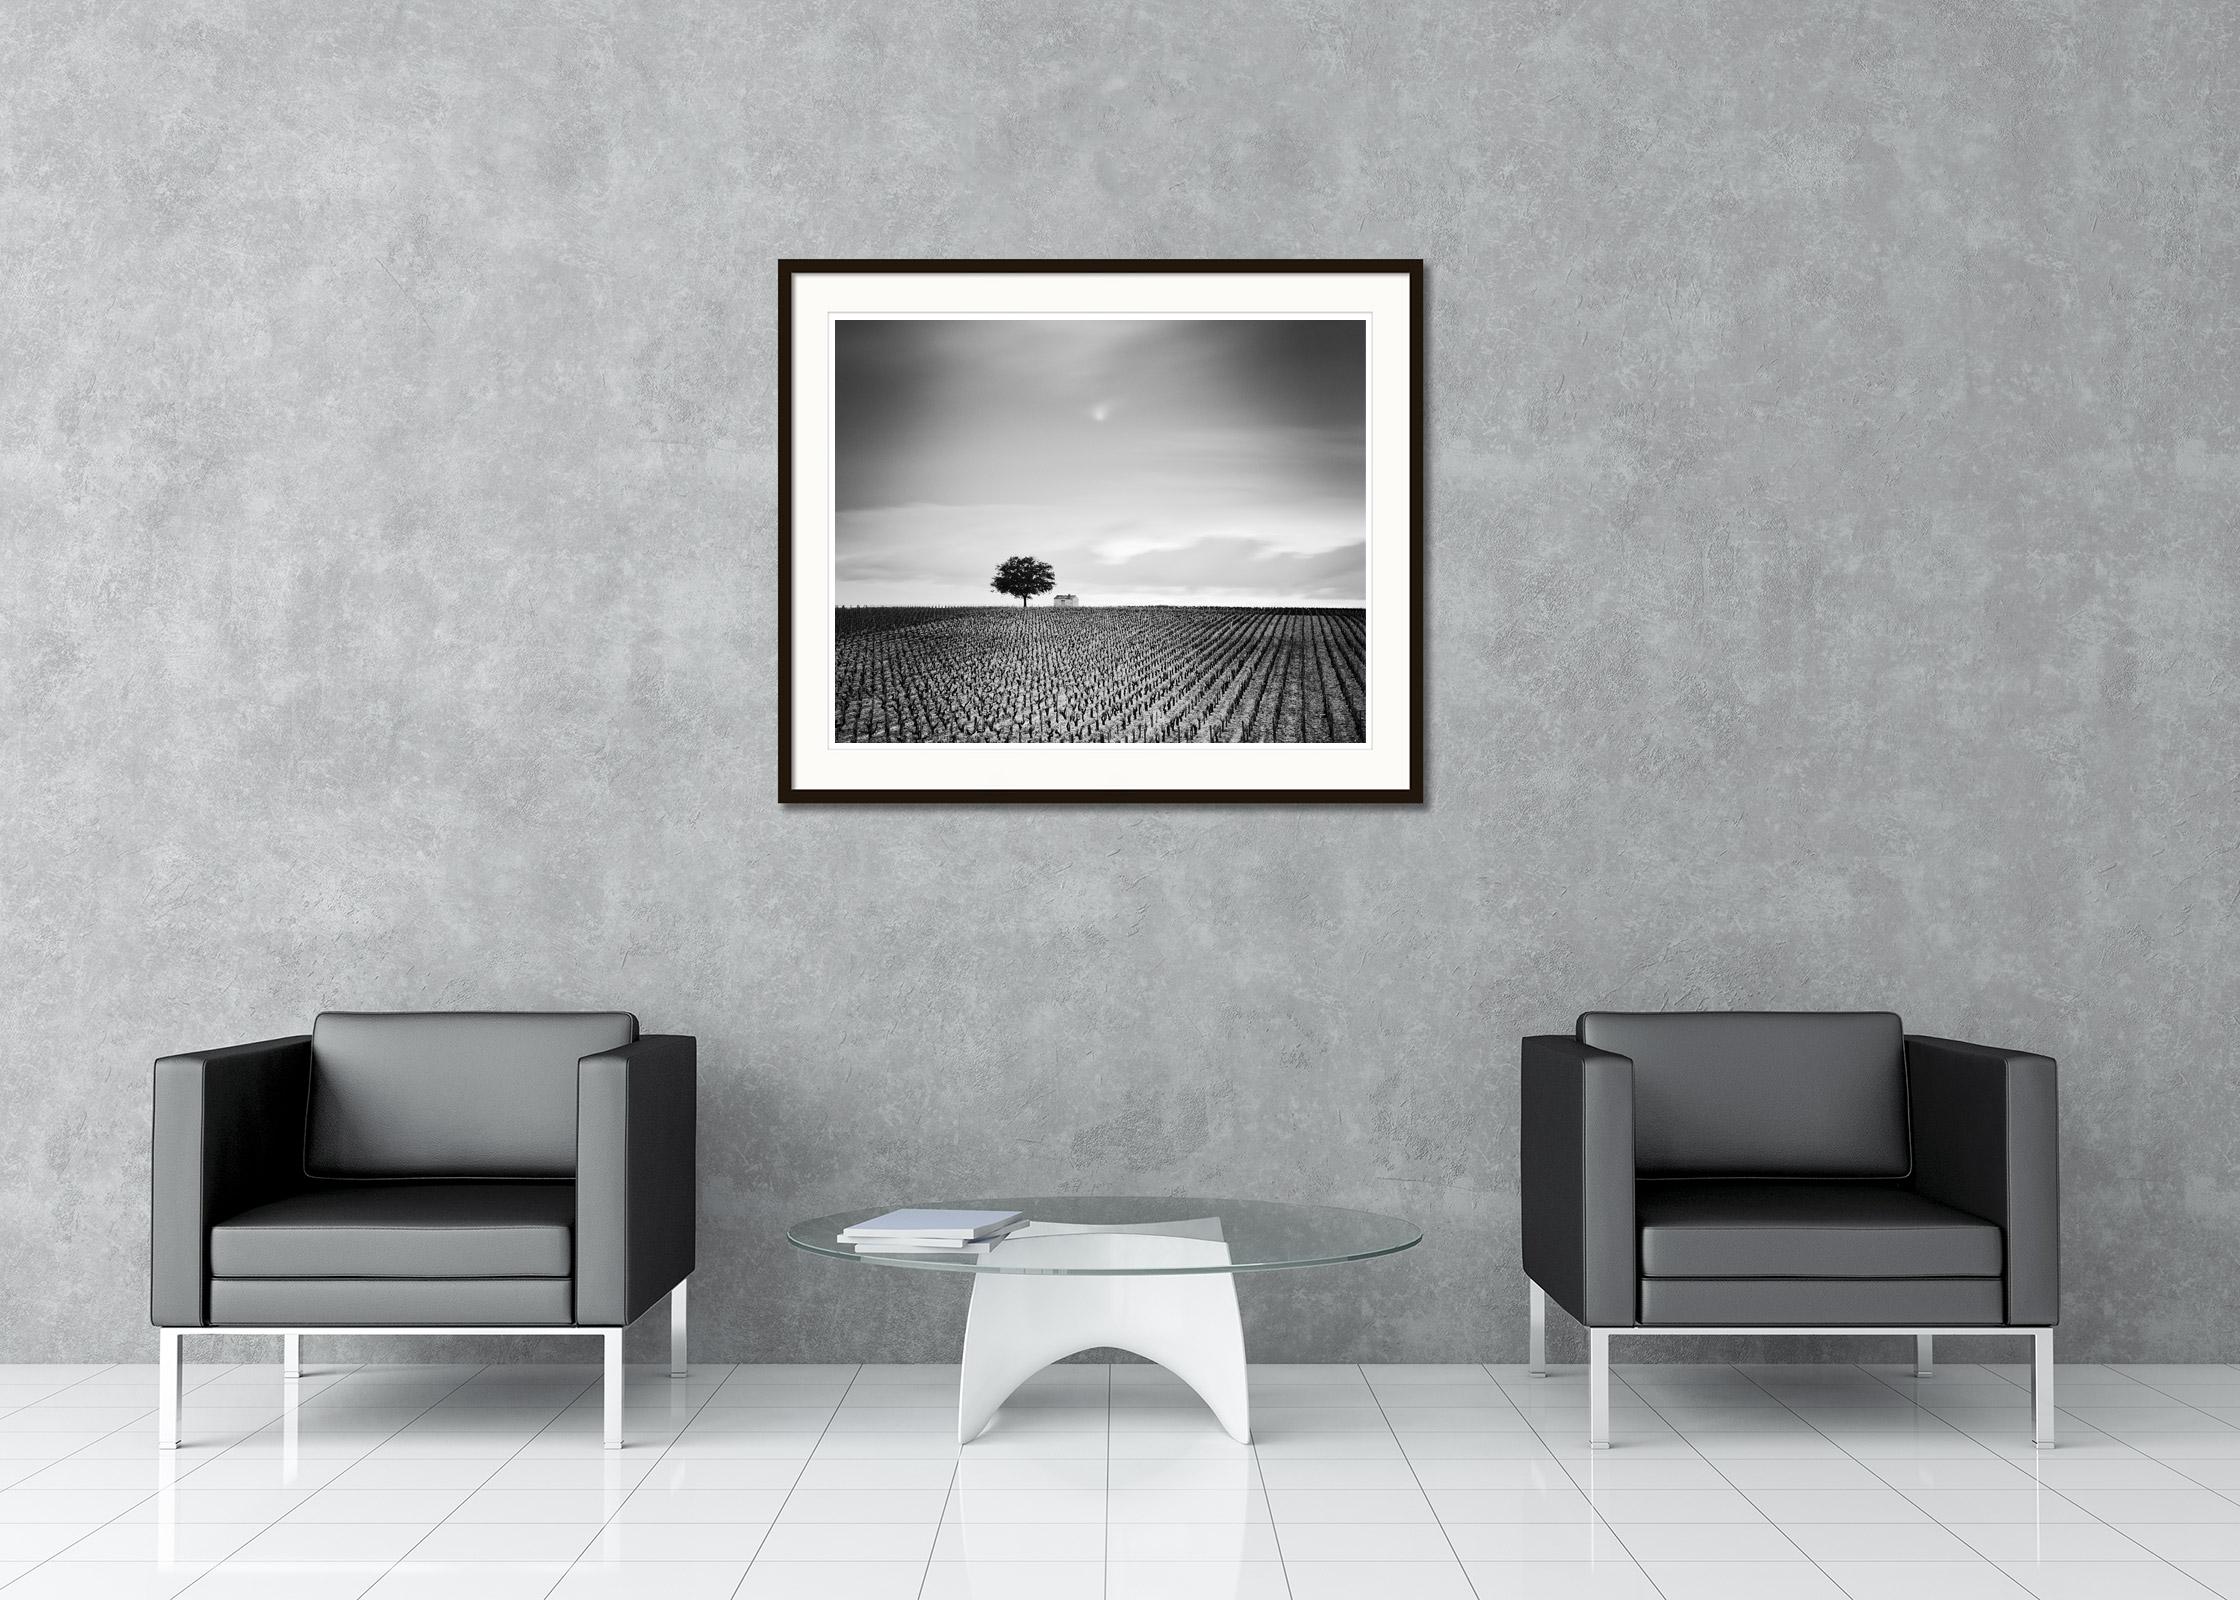 Black and white fine art long landscape photography. Archival pigment ink print as part of a limited edition of 9. All Gerald Berghammer prints are made to order in limited editions on Hahnemuehle Photo Rag Baryta. Each print is stamped on the back